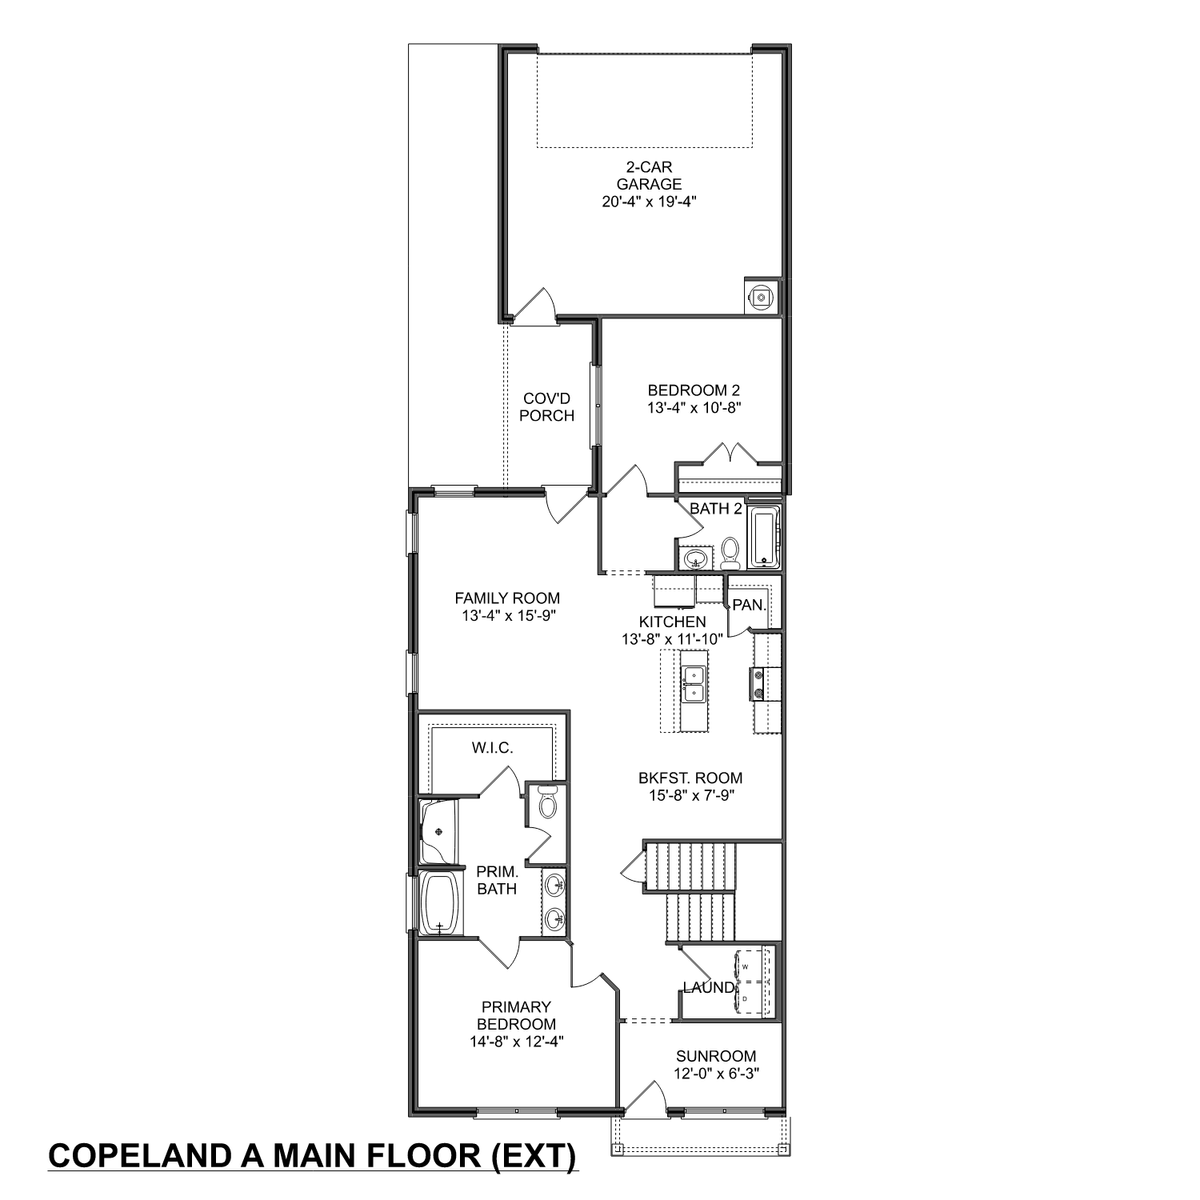 1 - The Copeland floor plan layout for 100 Atkinson Alley in Davidson Homes' Barnett's Crossing community.